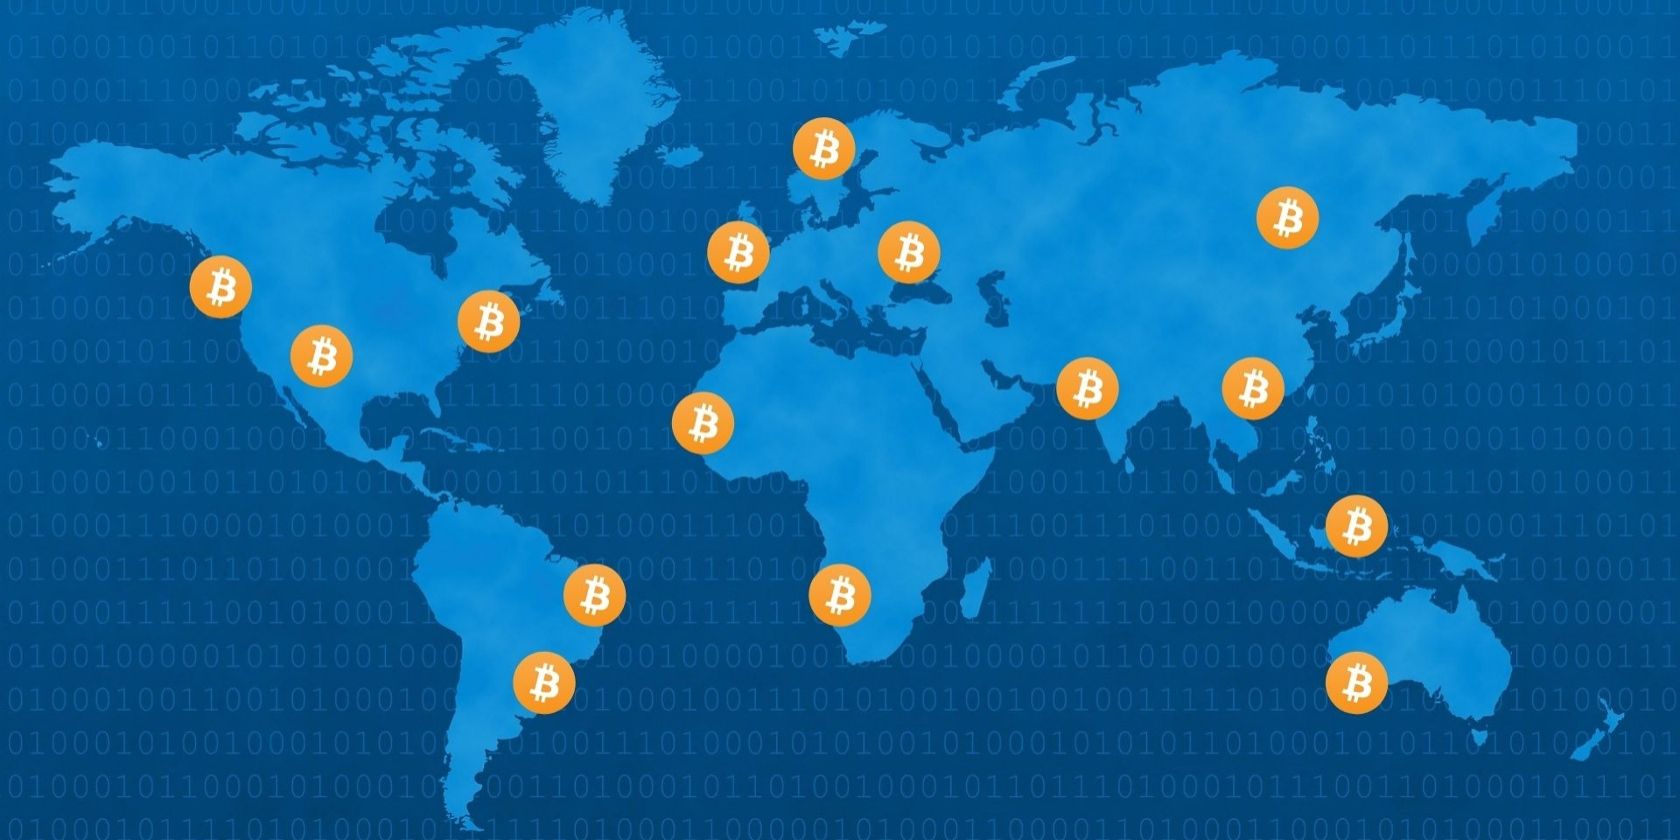 Who Owns the Most Bitcoin in the World?